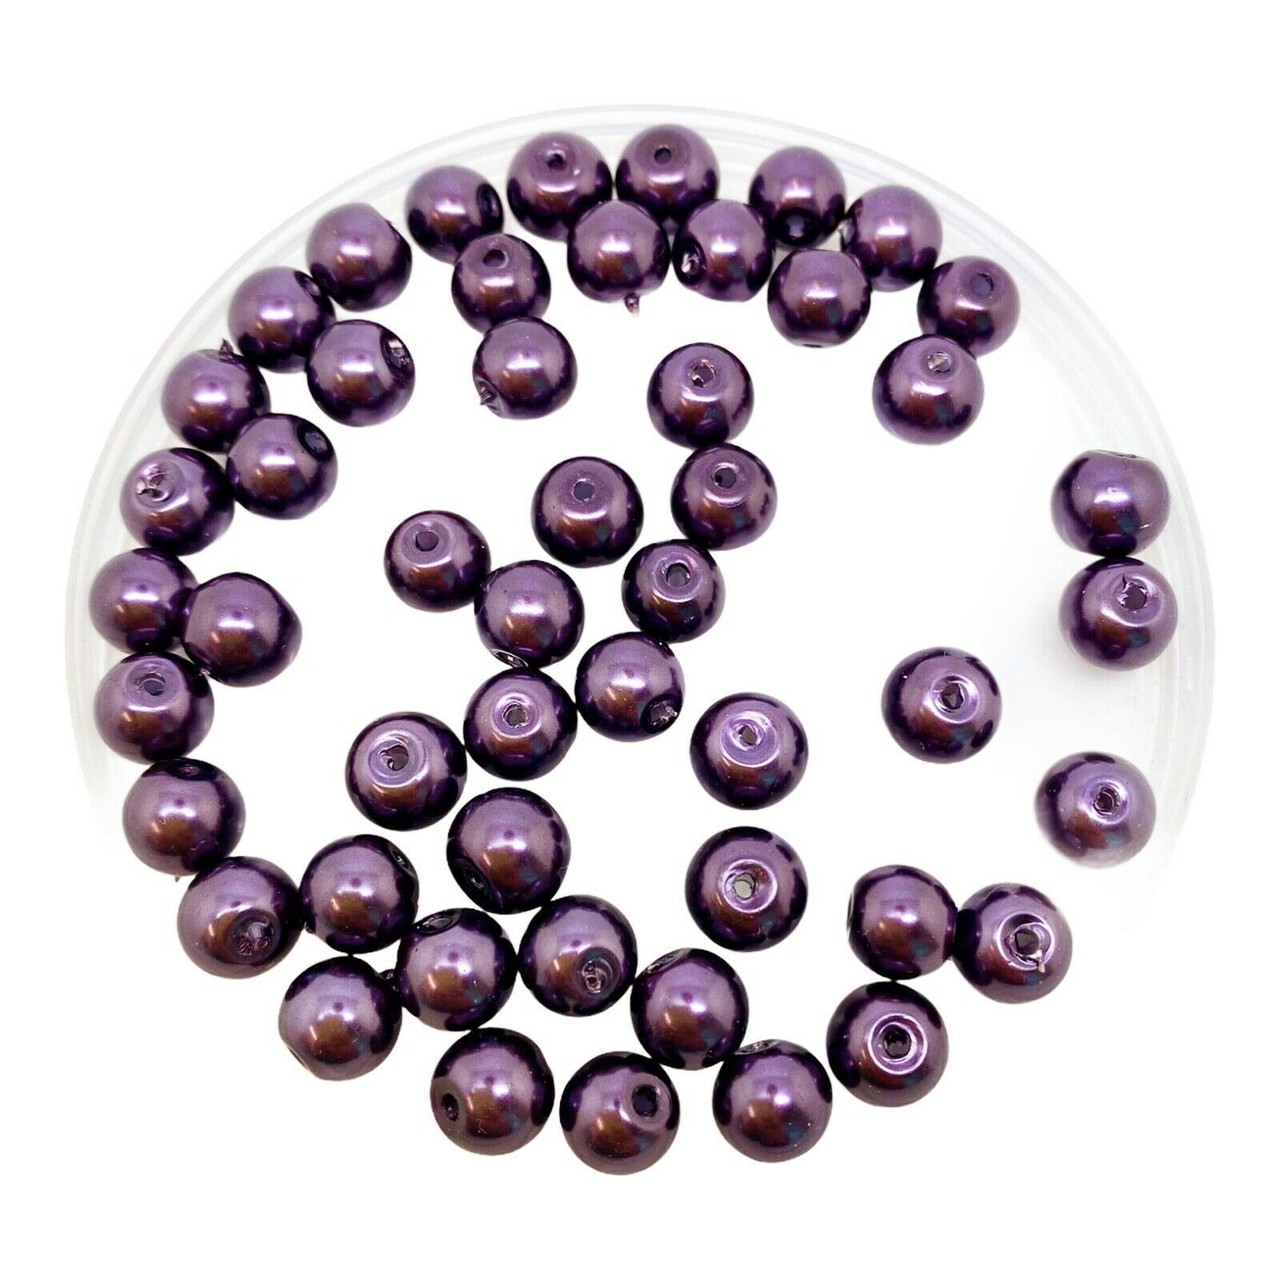 Blackcurrant 6mm Glass Pearls